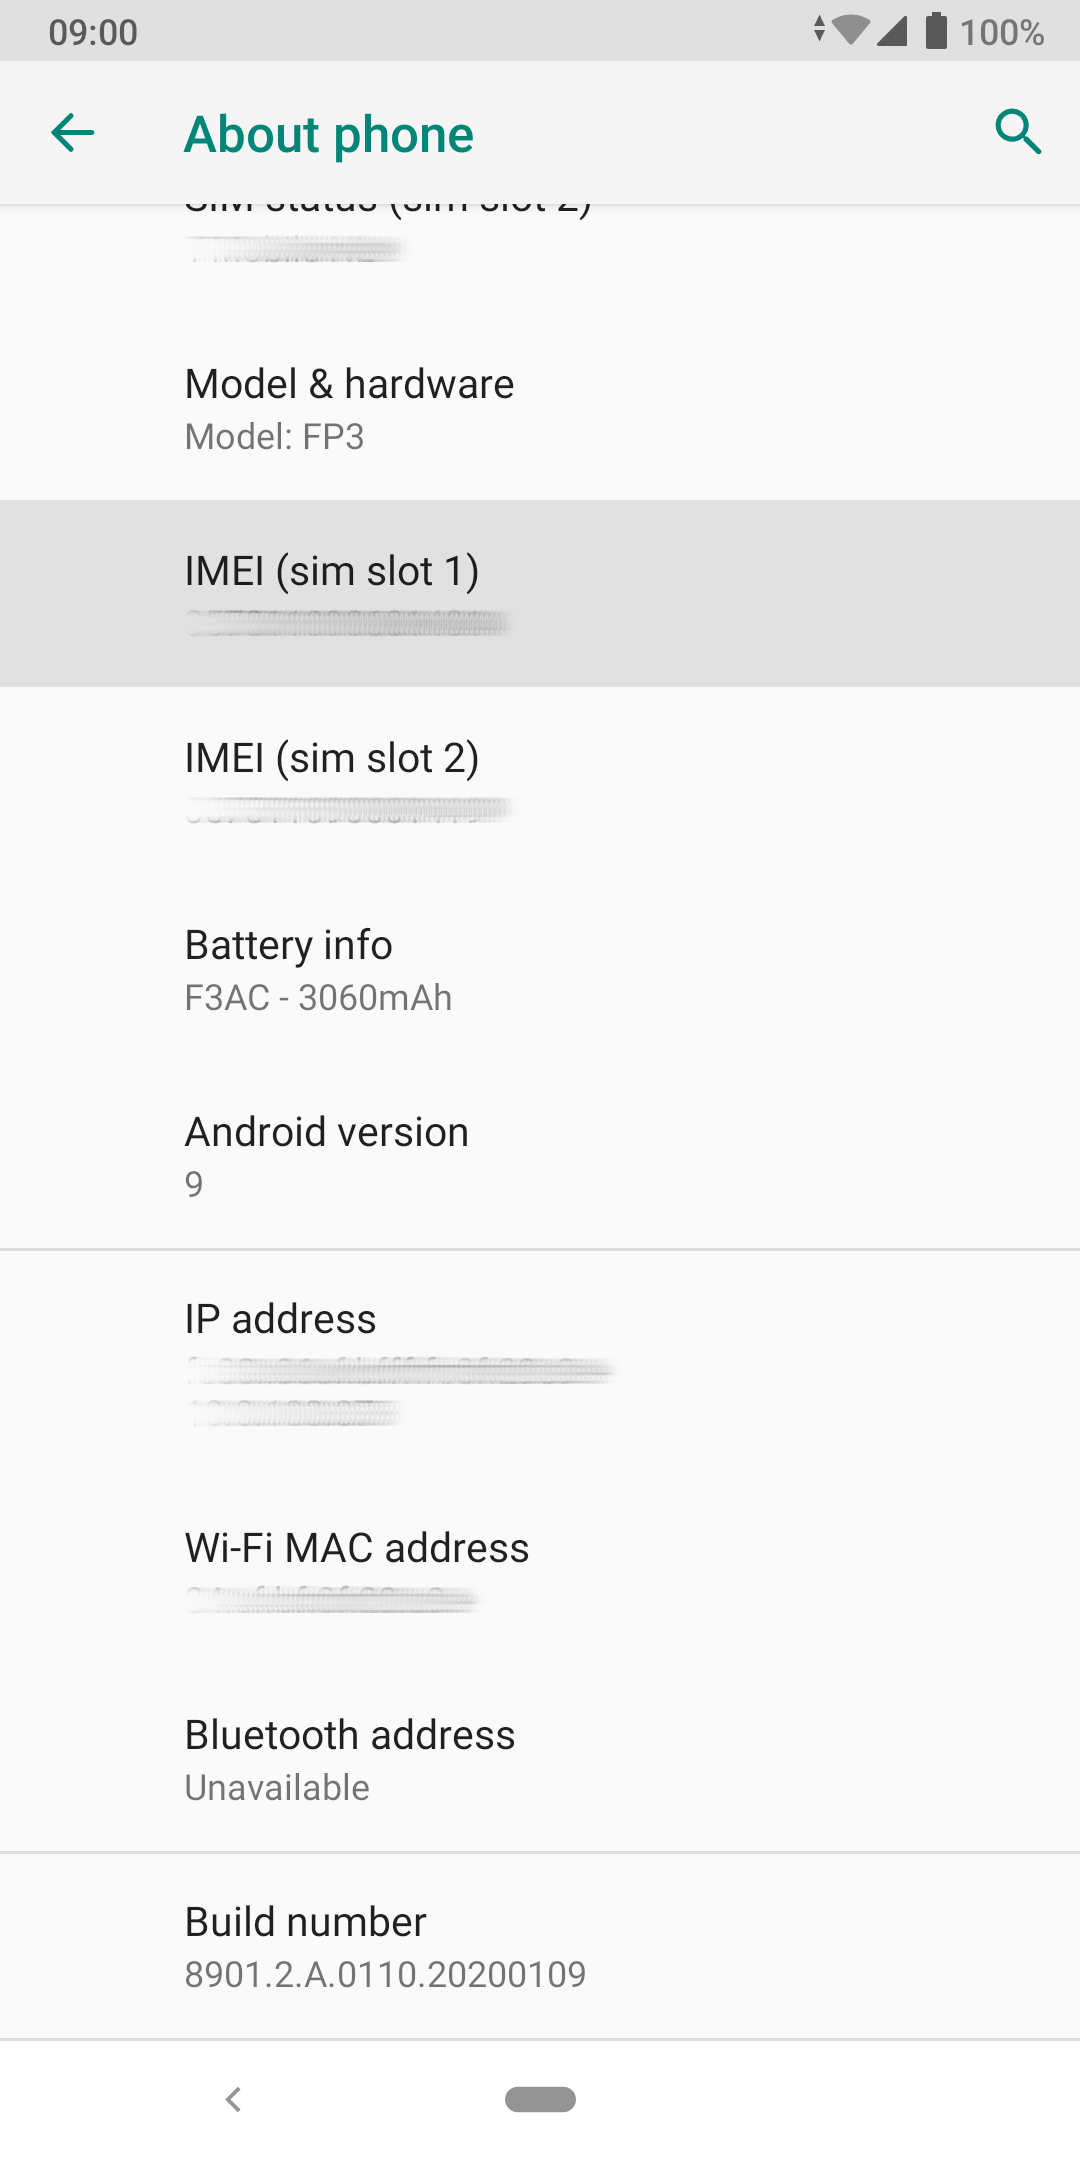 You can find the IMEI in the field labeled IMEI (sim slot 1).